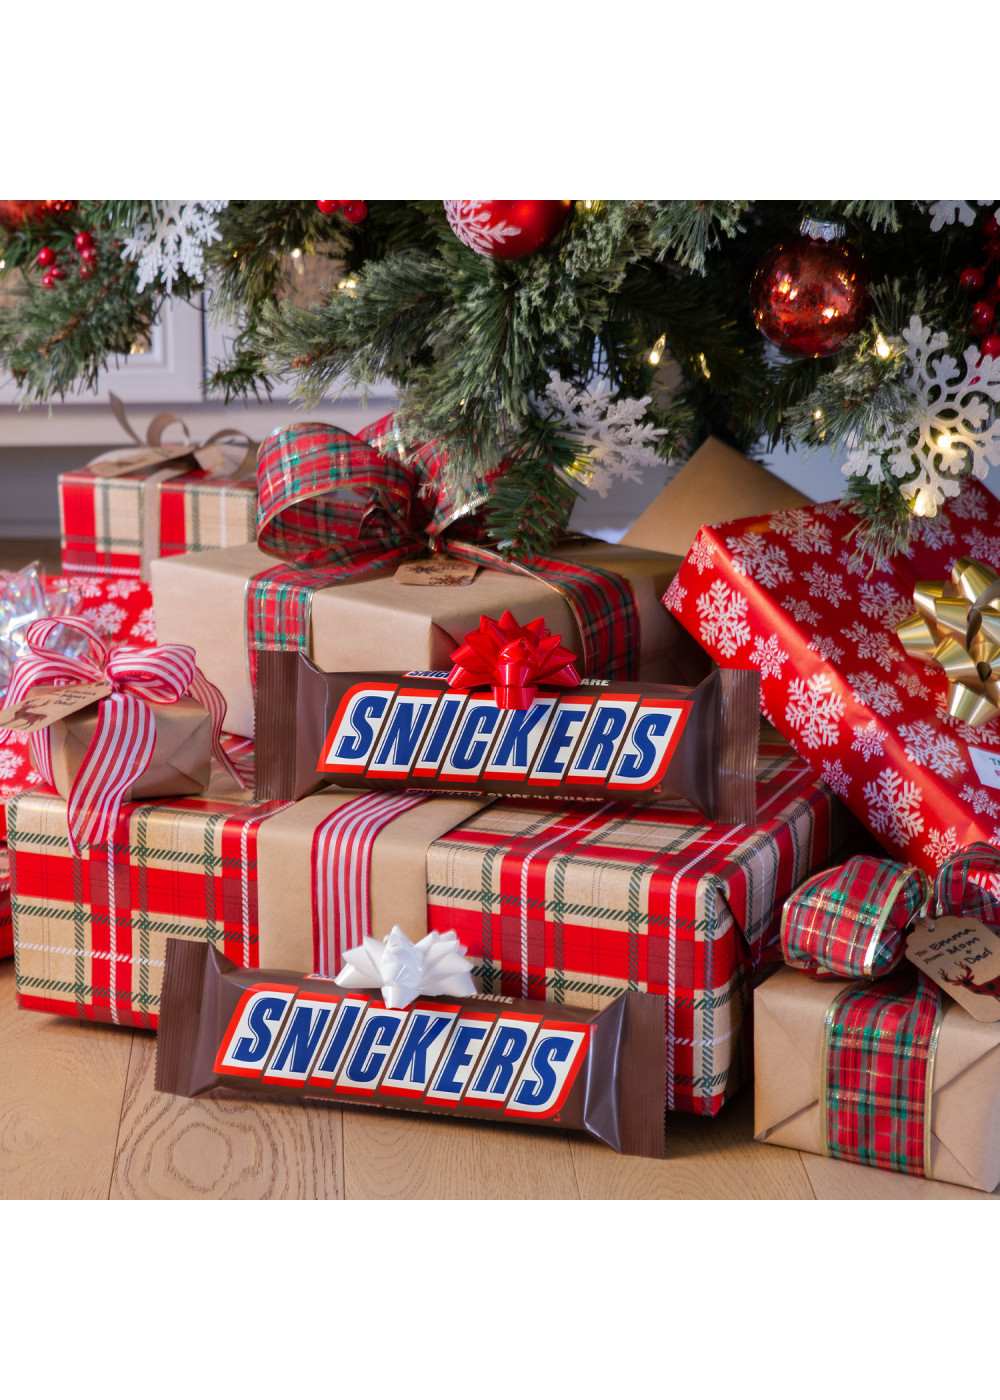 Snickers Chocolate Slice N' Share Holiday Candy Bar - Giant Size; image 4 of 7